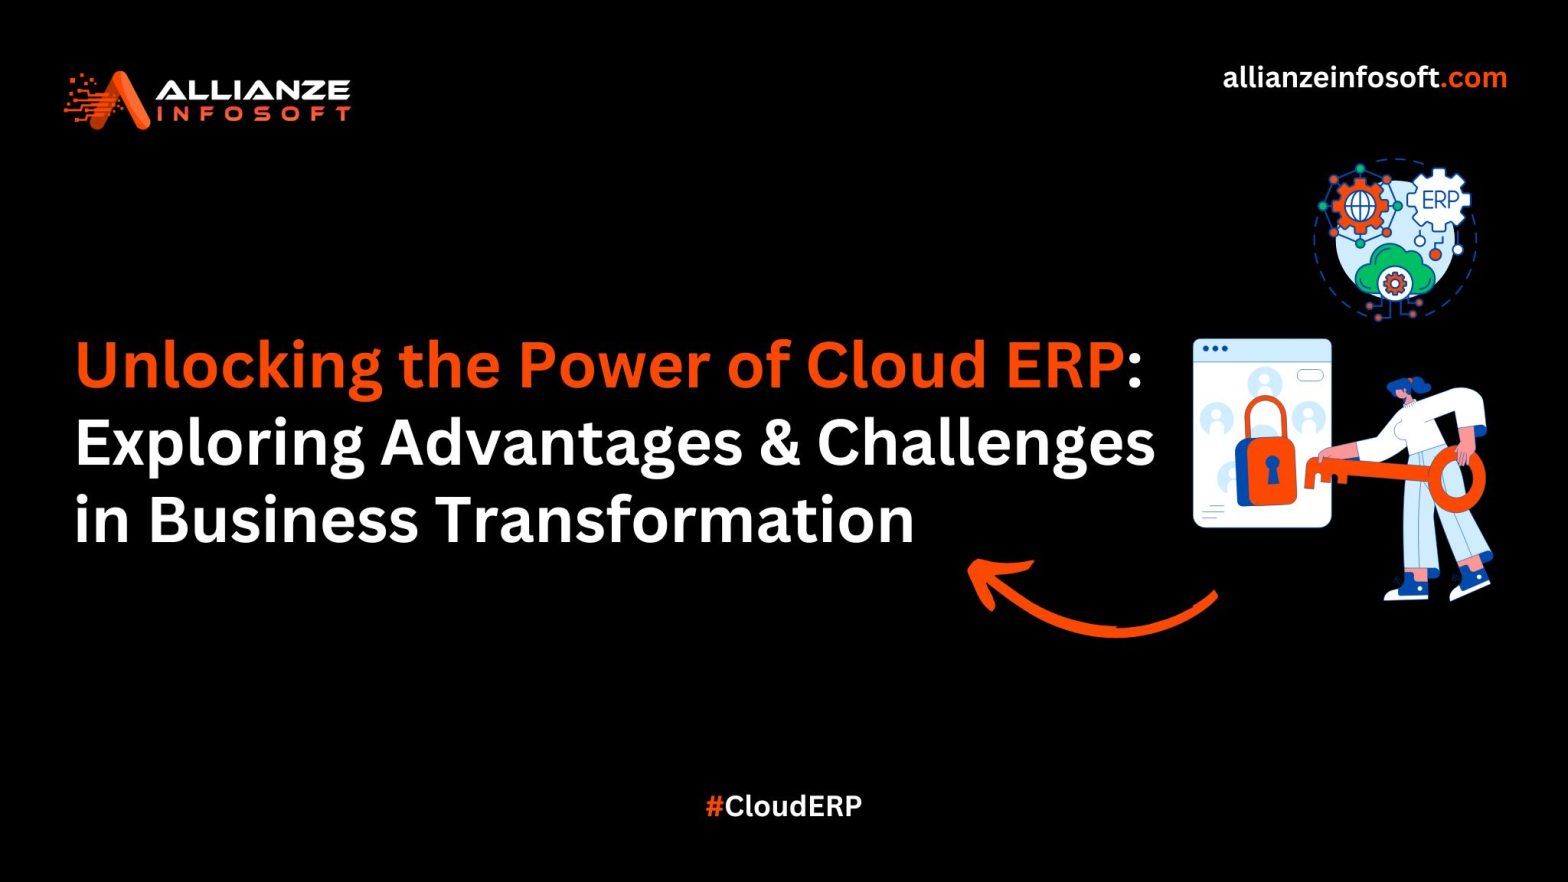 Unlock the Power of Cloud ERP Software: Exploring Advantages & Challenges in Business Transformation